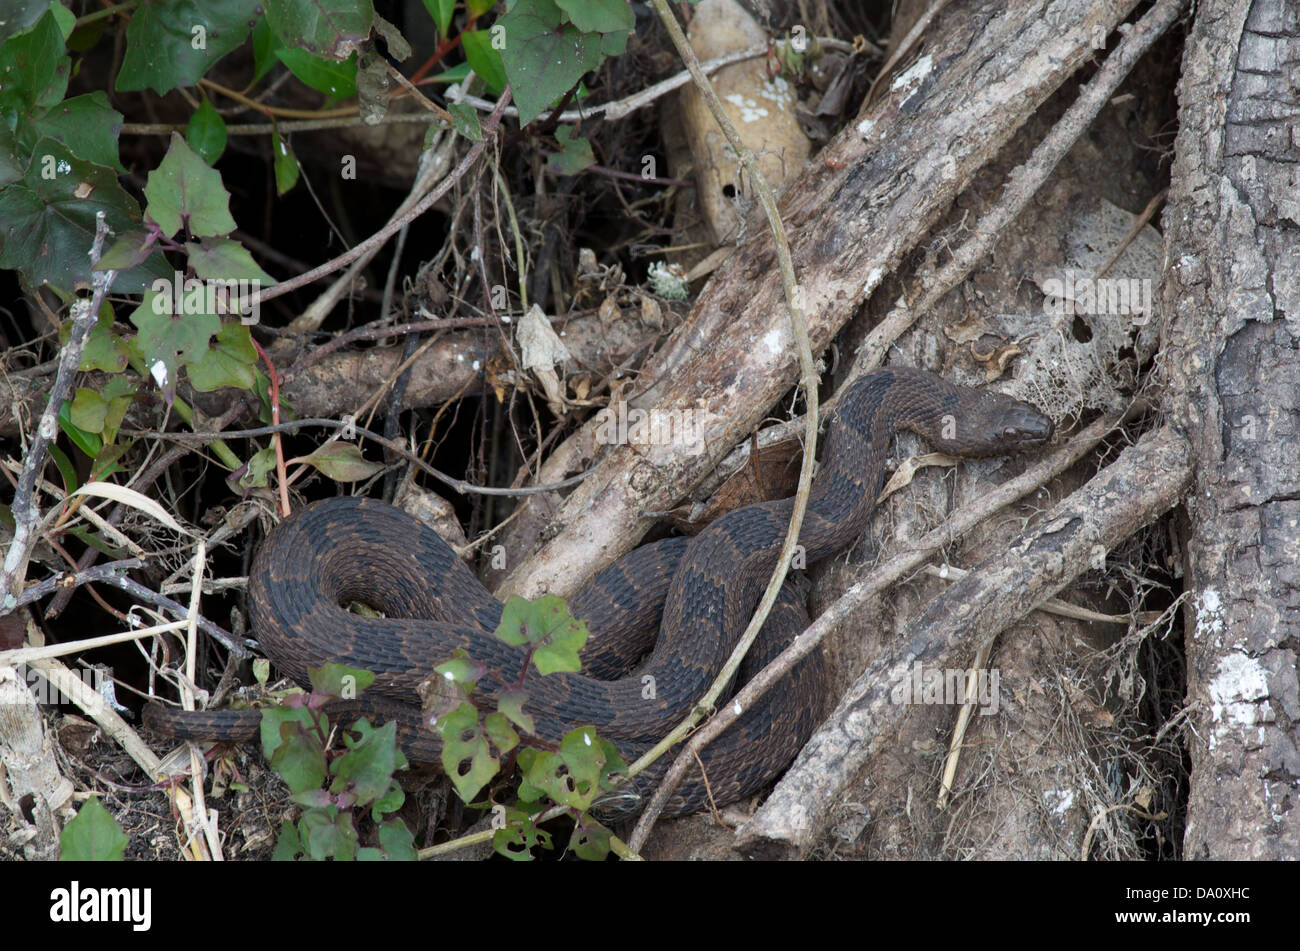 A Brown Watersnake (Nerodia taxispilota) basking on emergent plants on Anhinga Trail in Everglades National Park, Florida. Stock Photo